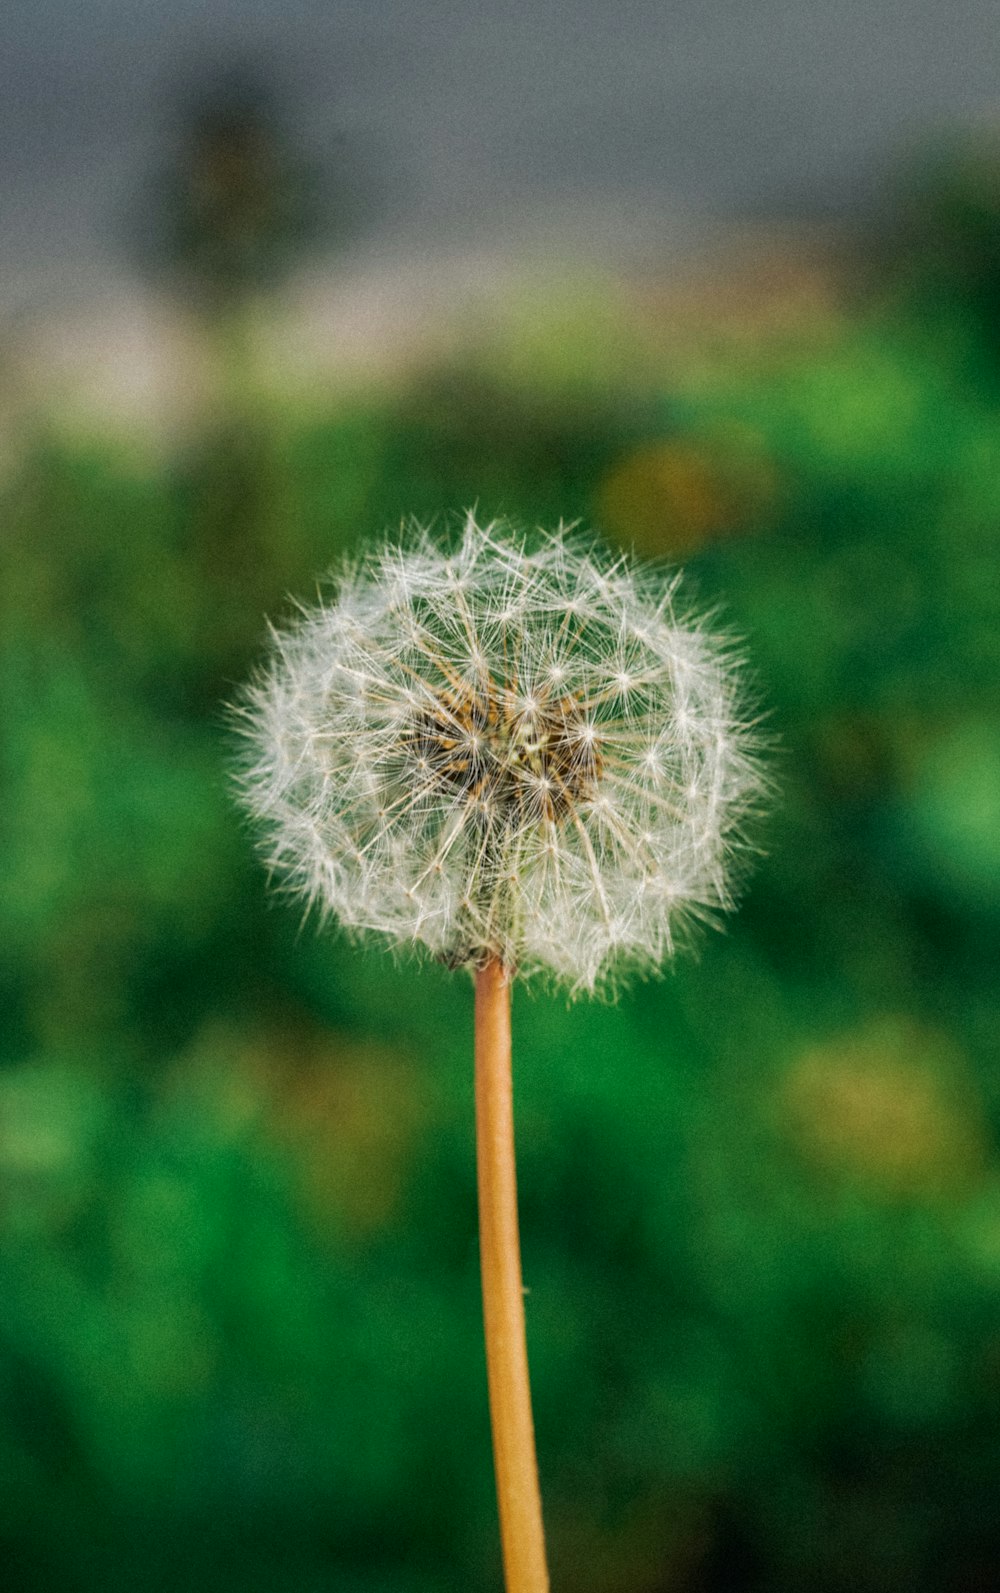 a dandelion in front of a blurry background